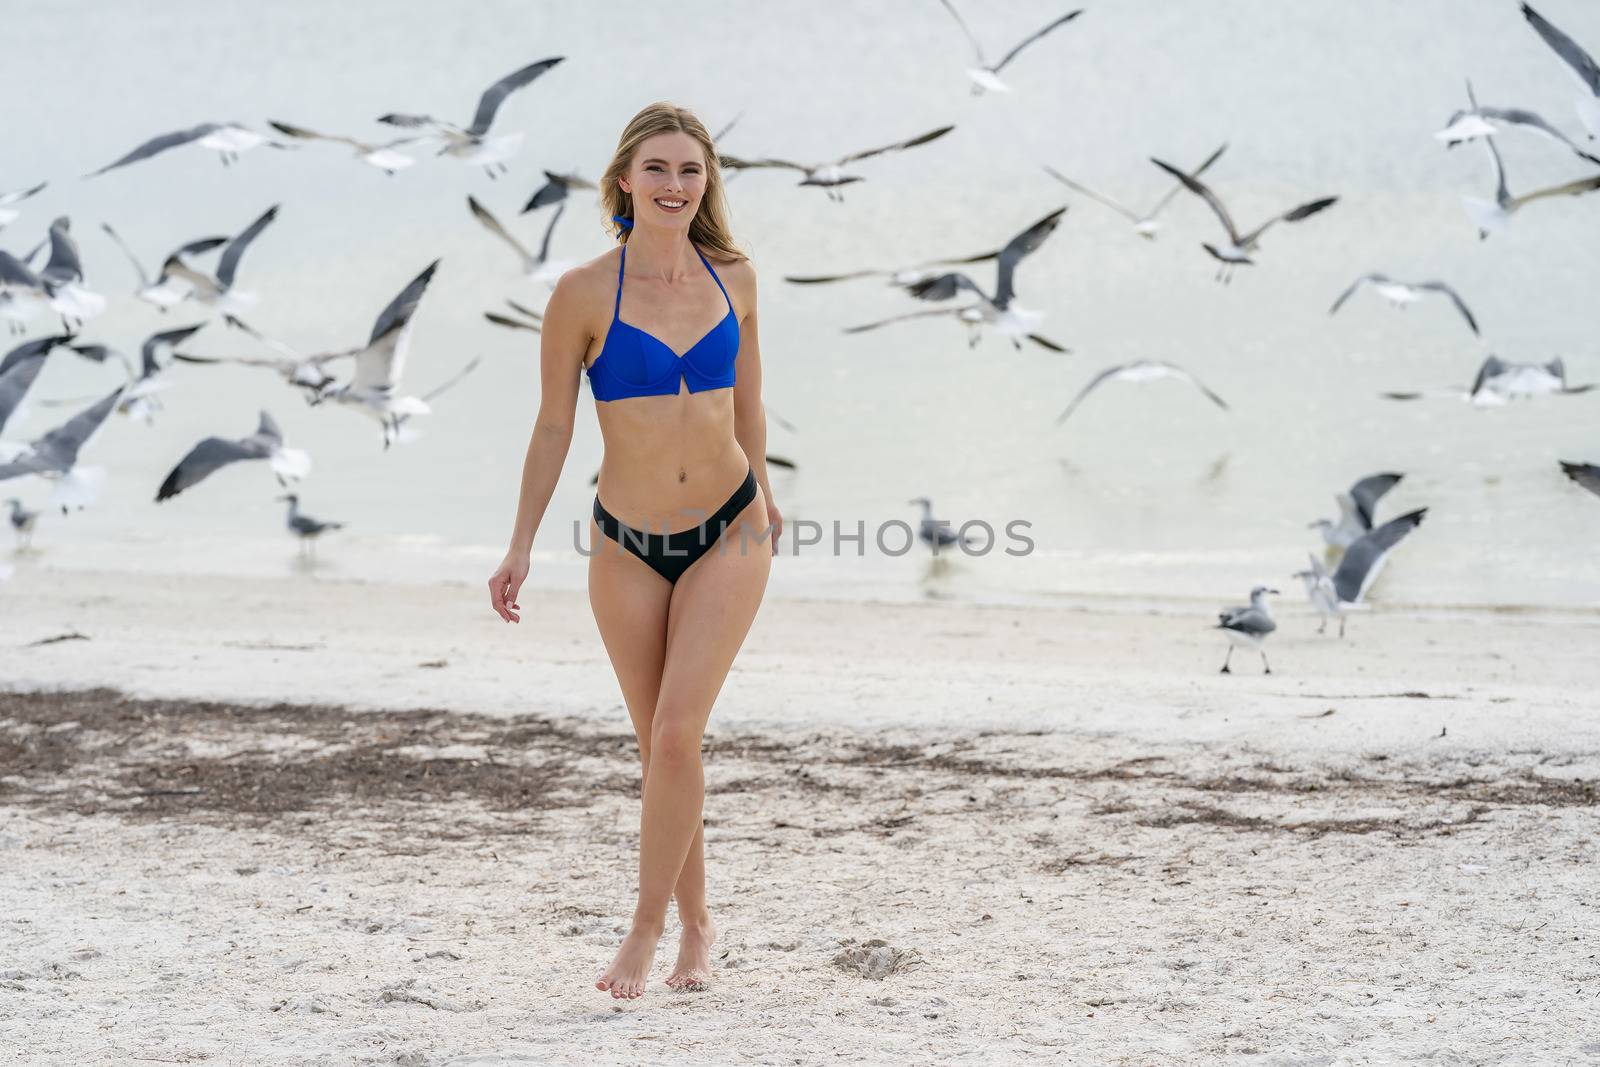 Lovely Blonde Bikini Model Posing Outdoors On A Caribbean Beach While Chasing Seagulls by actionsports